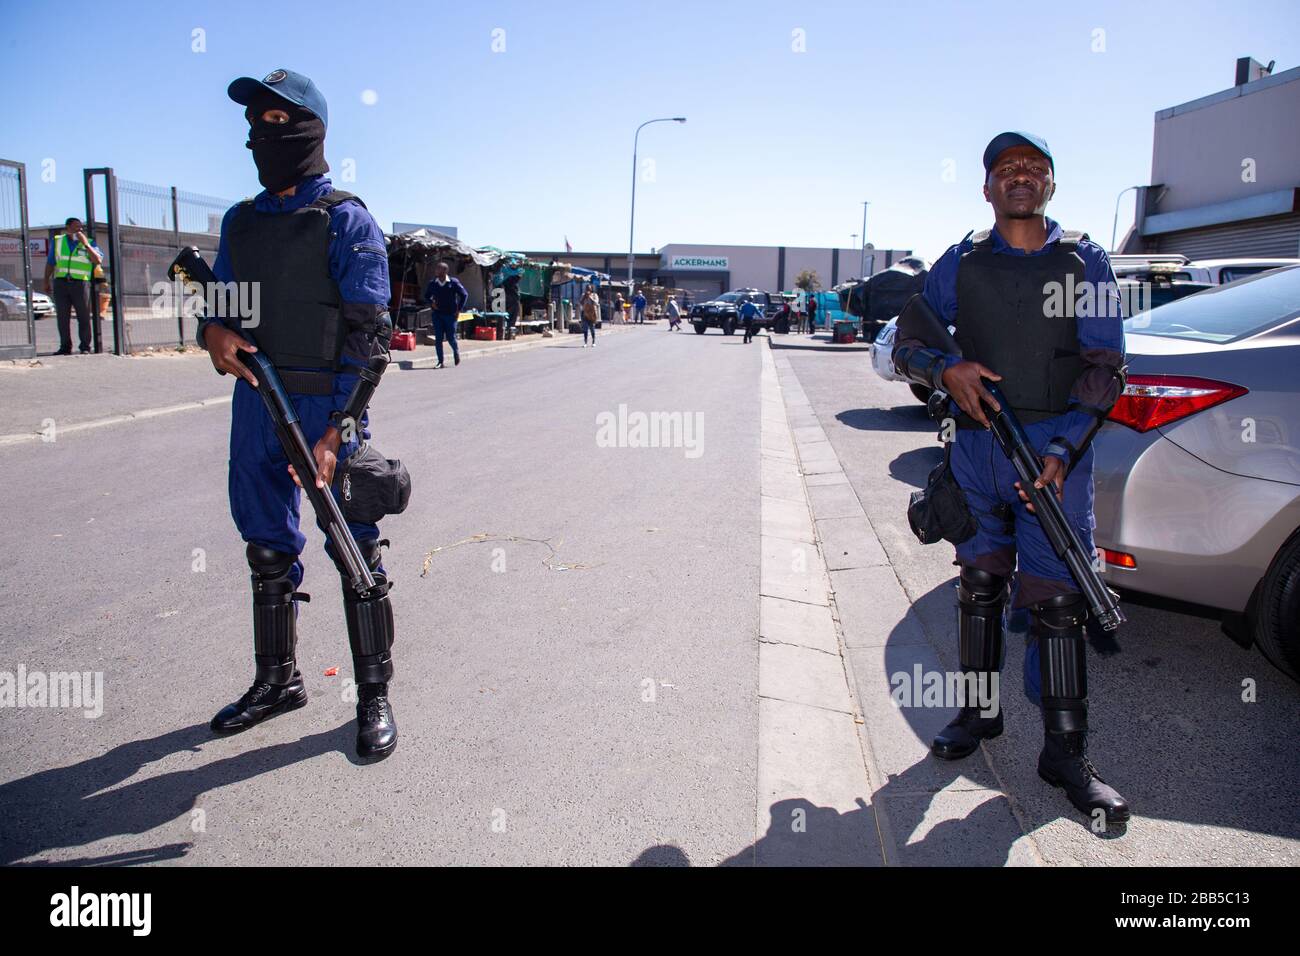 Cape Town, South Africa. 30th Mar, 2020. members of TSU Protection Services stand guard inside a gate at a SASSA (South African Social Security Agency) paypoint in Philippi as hundreds of people wait their turn to enter to collect their money after the South African government declared a 21 day COVID-19 lockdown as part of the State of National Disaster declaration by President Cyril Ramaphosa. The Health Ministry has asked residents to observe the regulations, practise hygiene, stay at home and practise social distancing. Credit: Roger Sedres/Alamy Live News Stock Photo